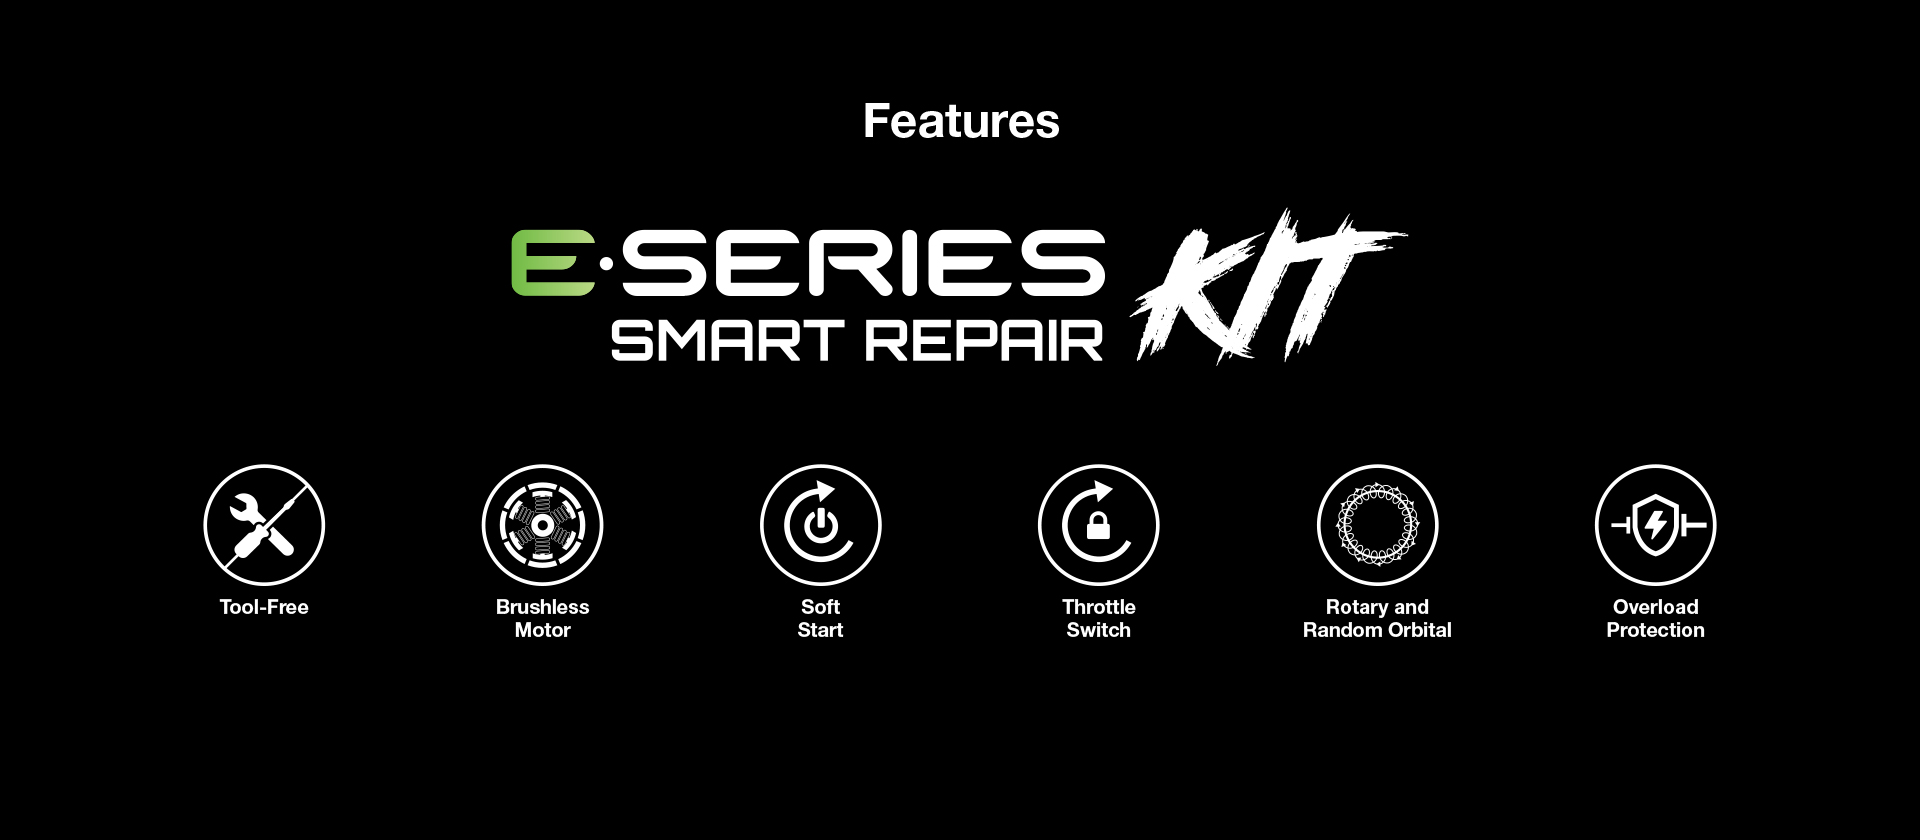 E-Series PRO X Smart Repair Kit Features and Benefits